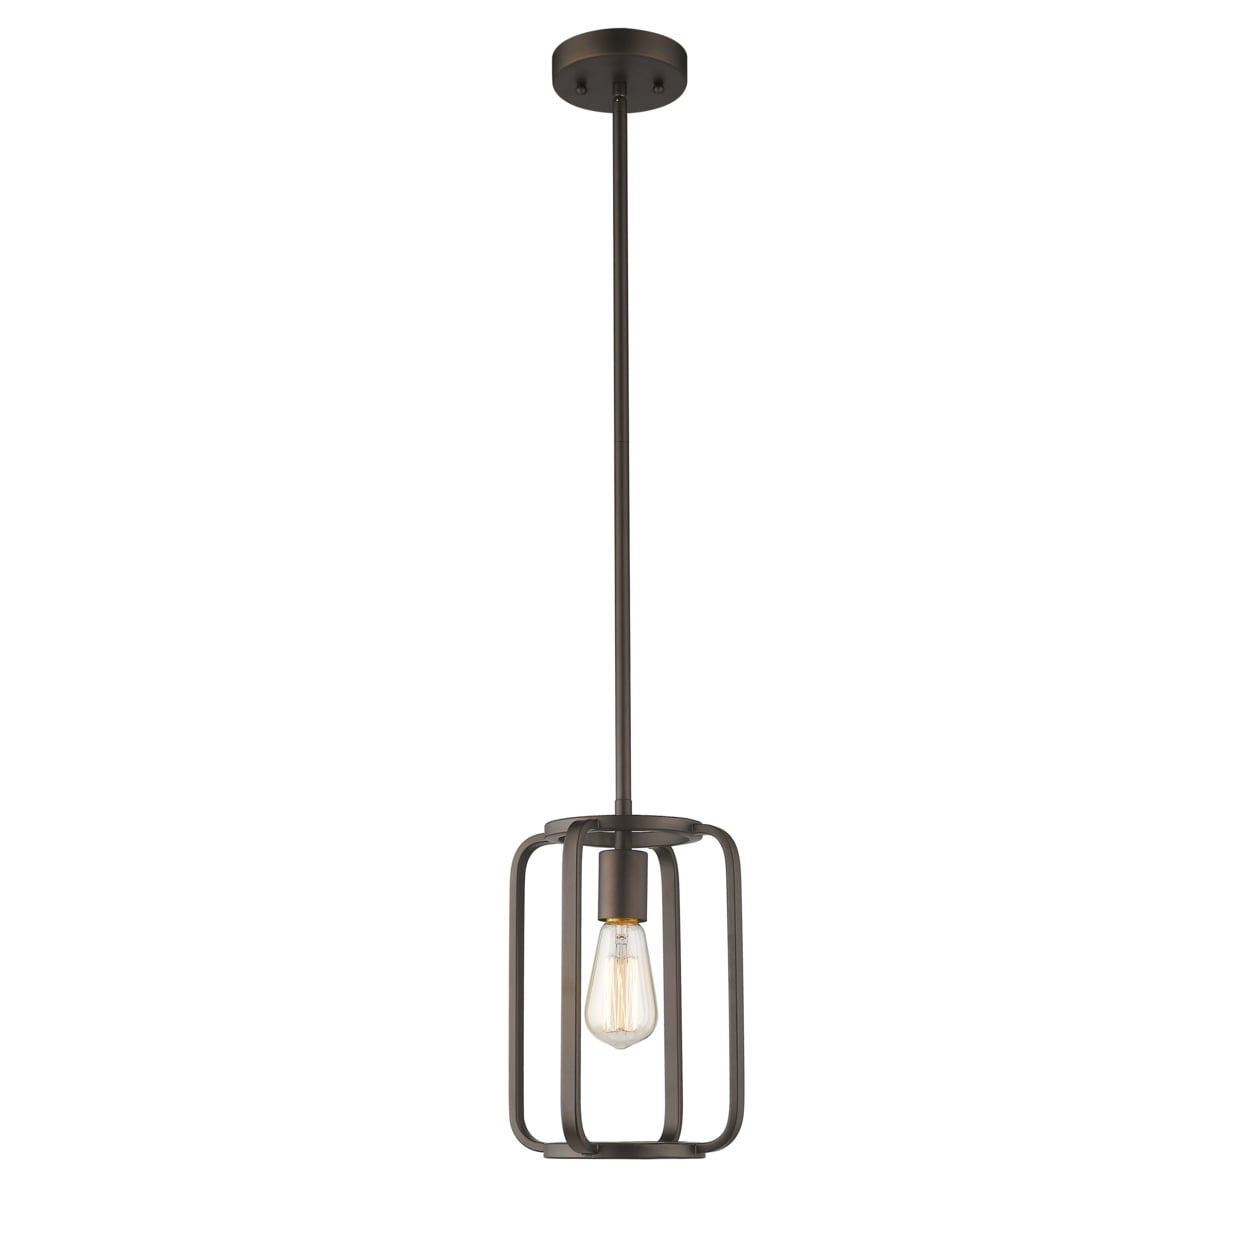 Ch2d124rb08-dp1 Ironclad Industrial 1 Light Rubbed Bronze Mini Ceiling Pendant - 8 In.